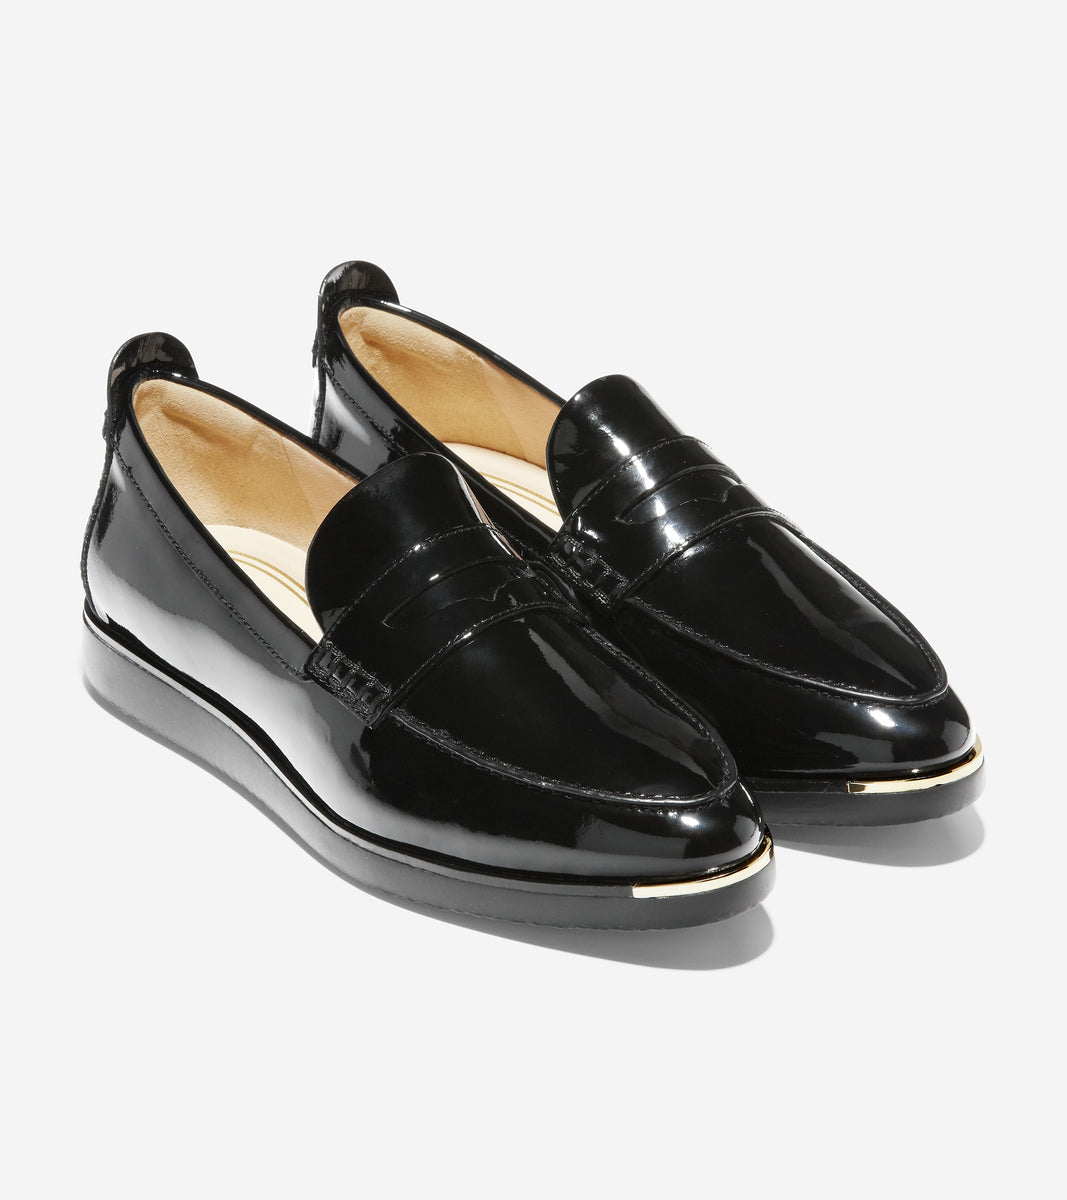 ColeHaan-Grand Ambition Troy Slip-On Sneaker-w19836-Black Patent Leather